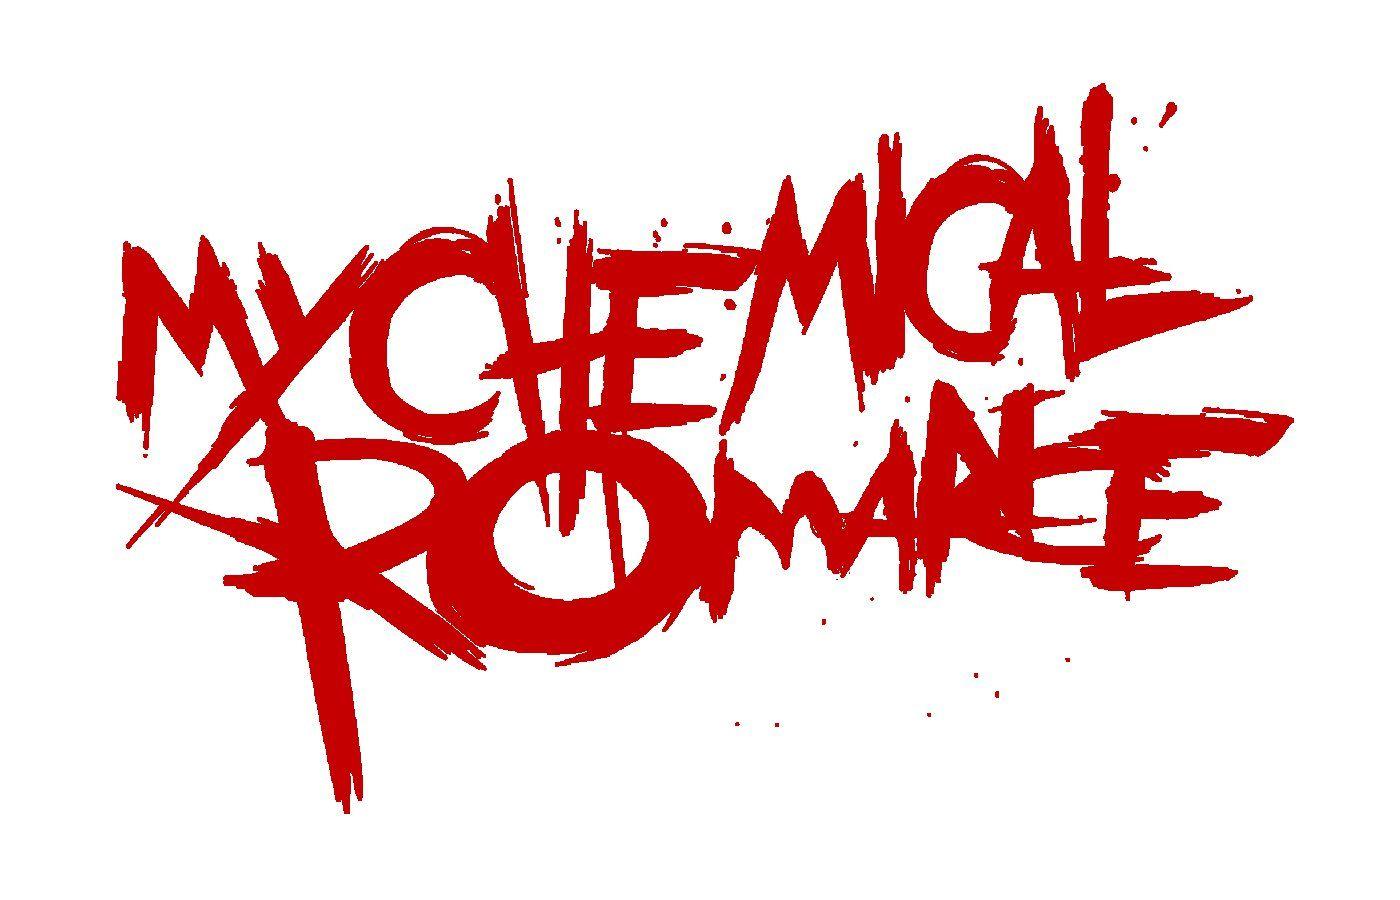 Mcrx Logo - Meaning My Chemical Romance logo and symbol | history and evolution